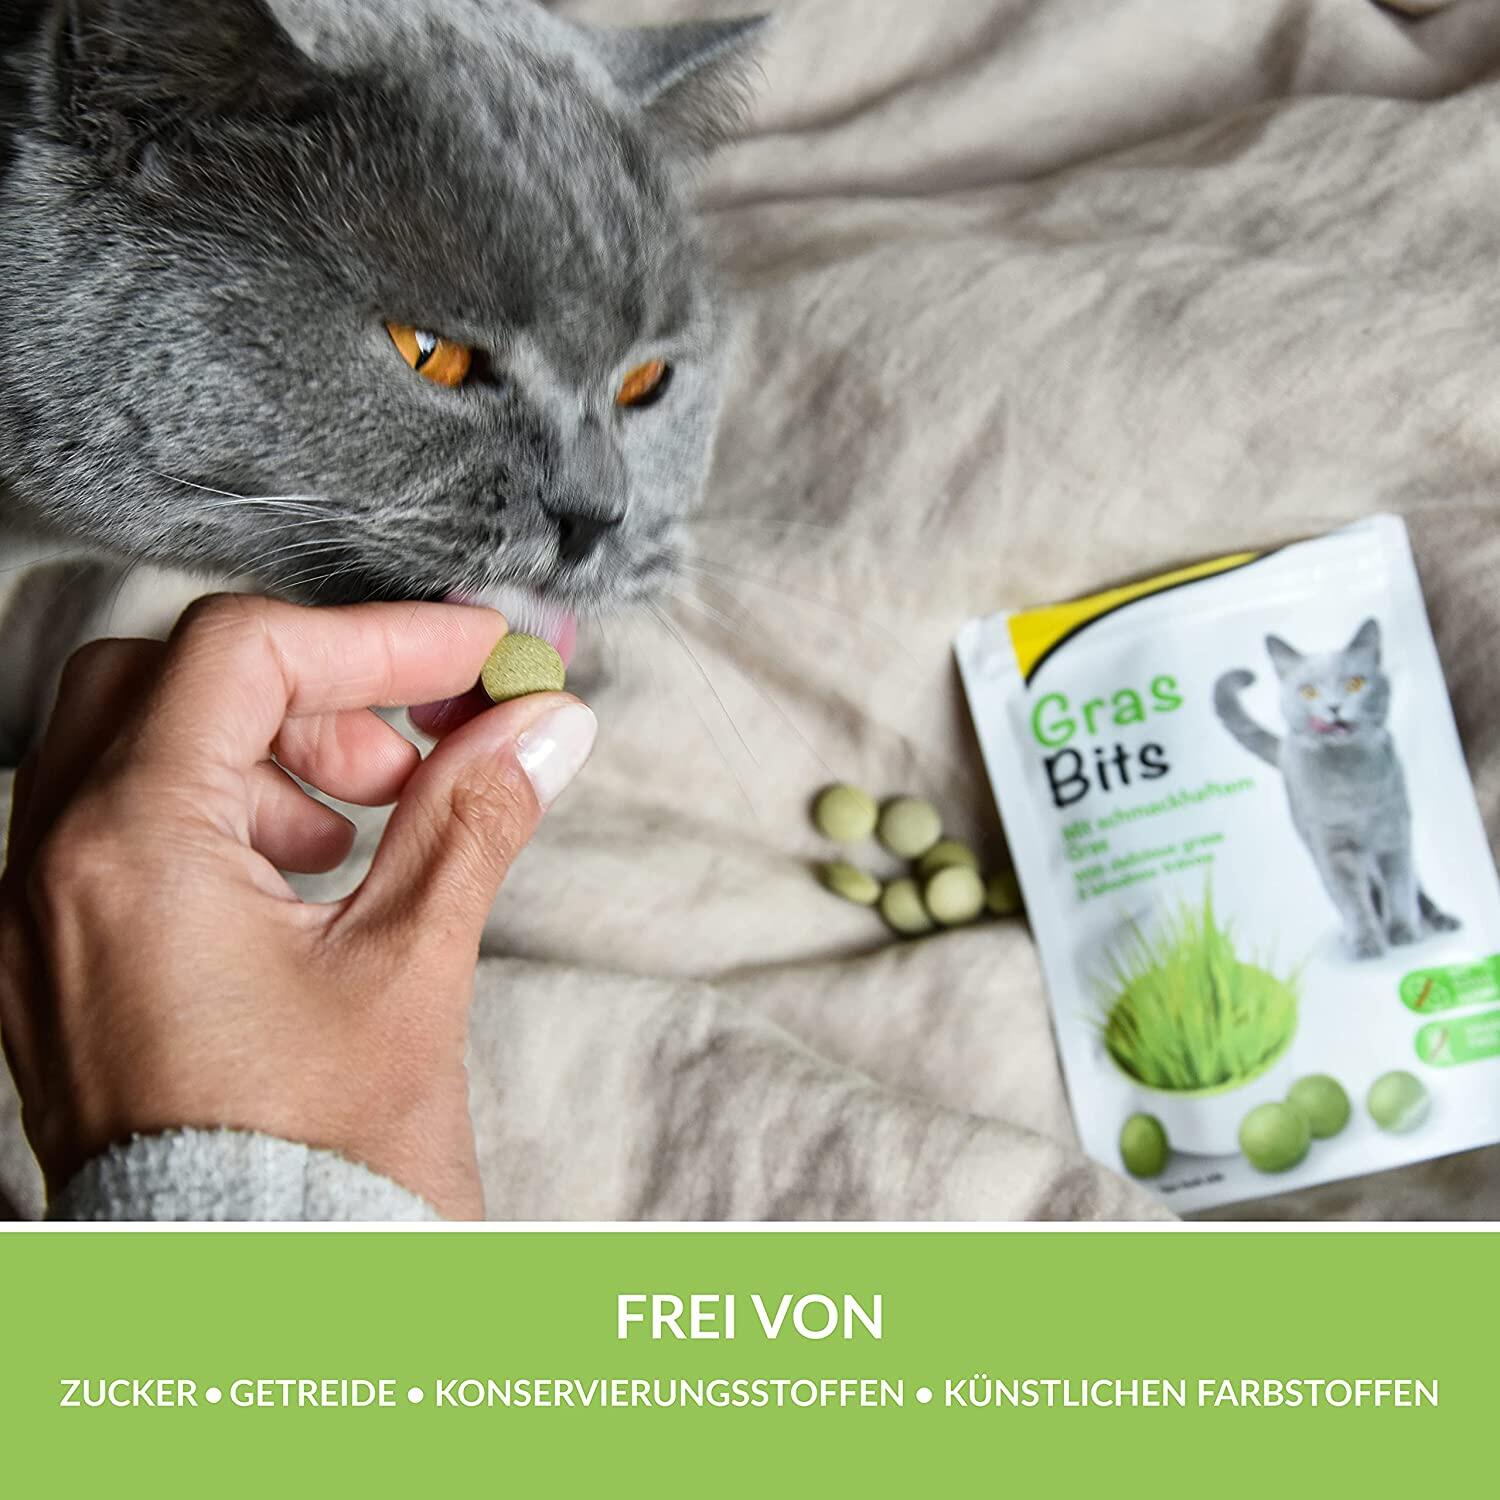 GimCat Grass Bits - Grain-free cat snacks rich in vitamin containing real grass gras